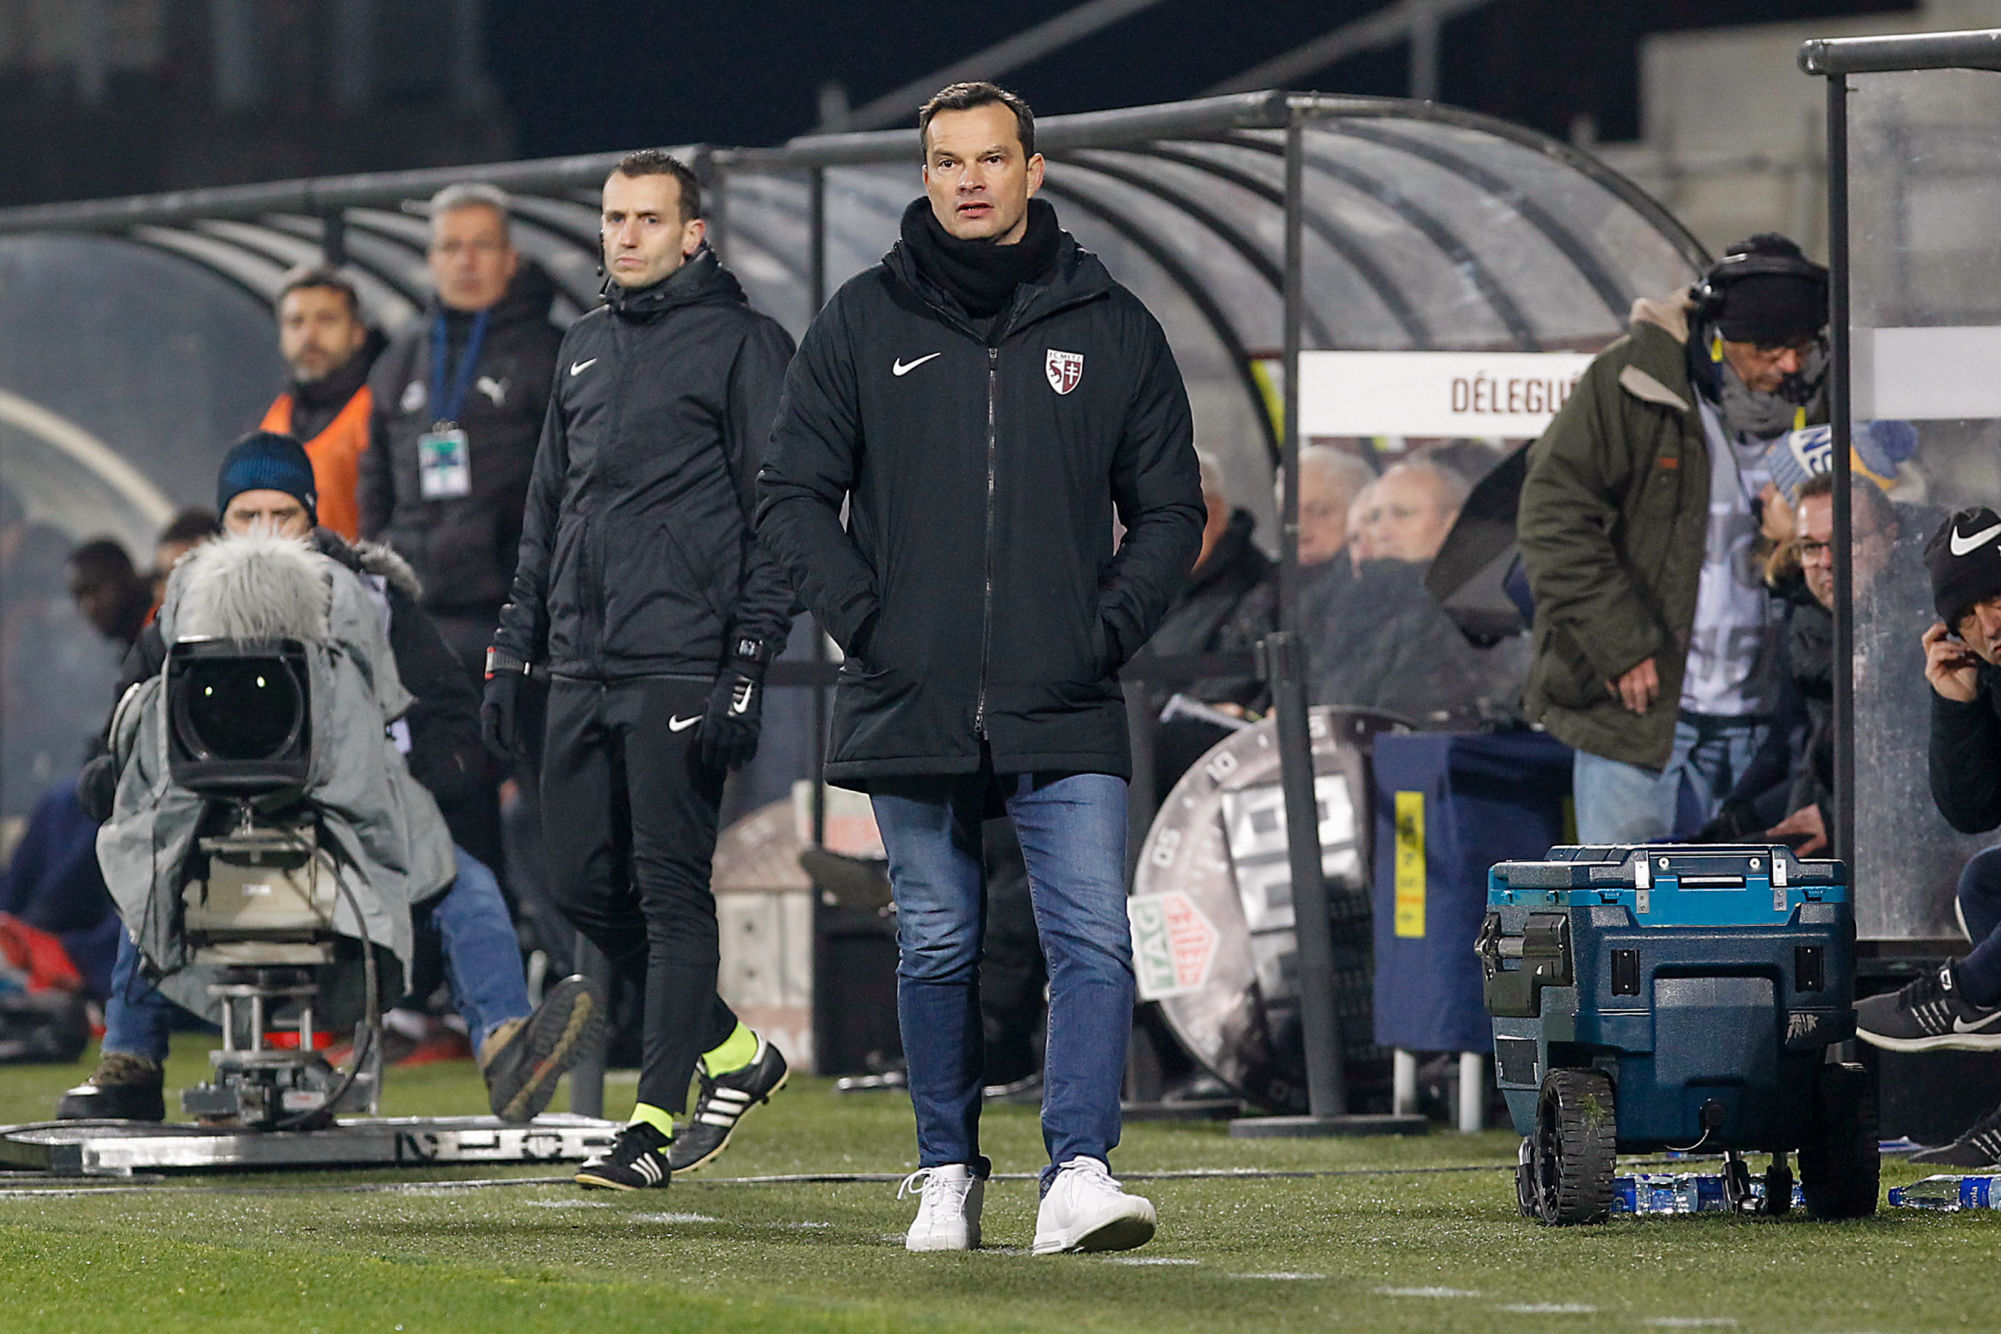 Vincent Hognon coach of Metz during the Ligue 1 match between FC Metz and Girondins Bordeaux at Stade Saint-Symphorien on February 8, 2020 in Metz, France. (Photo by Fred Marvaux/Icon Sport) - Vincent HOGNON - Stade Saint-Symphorien - Metz (France)